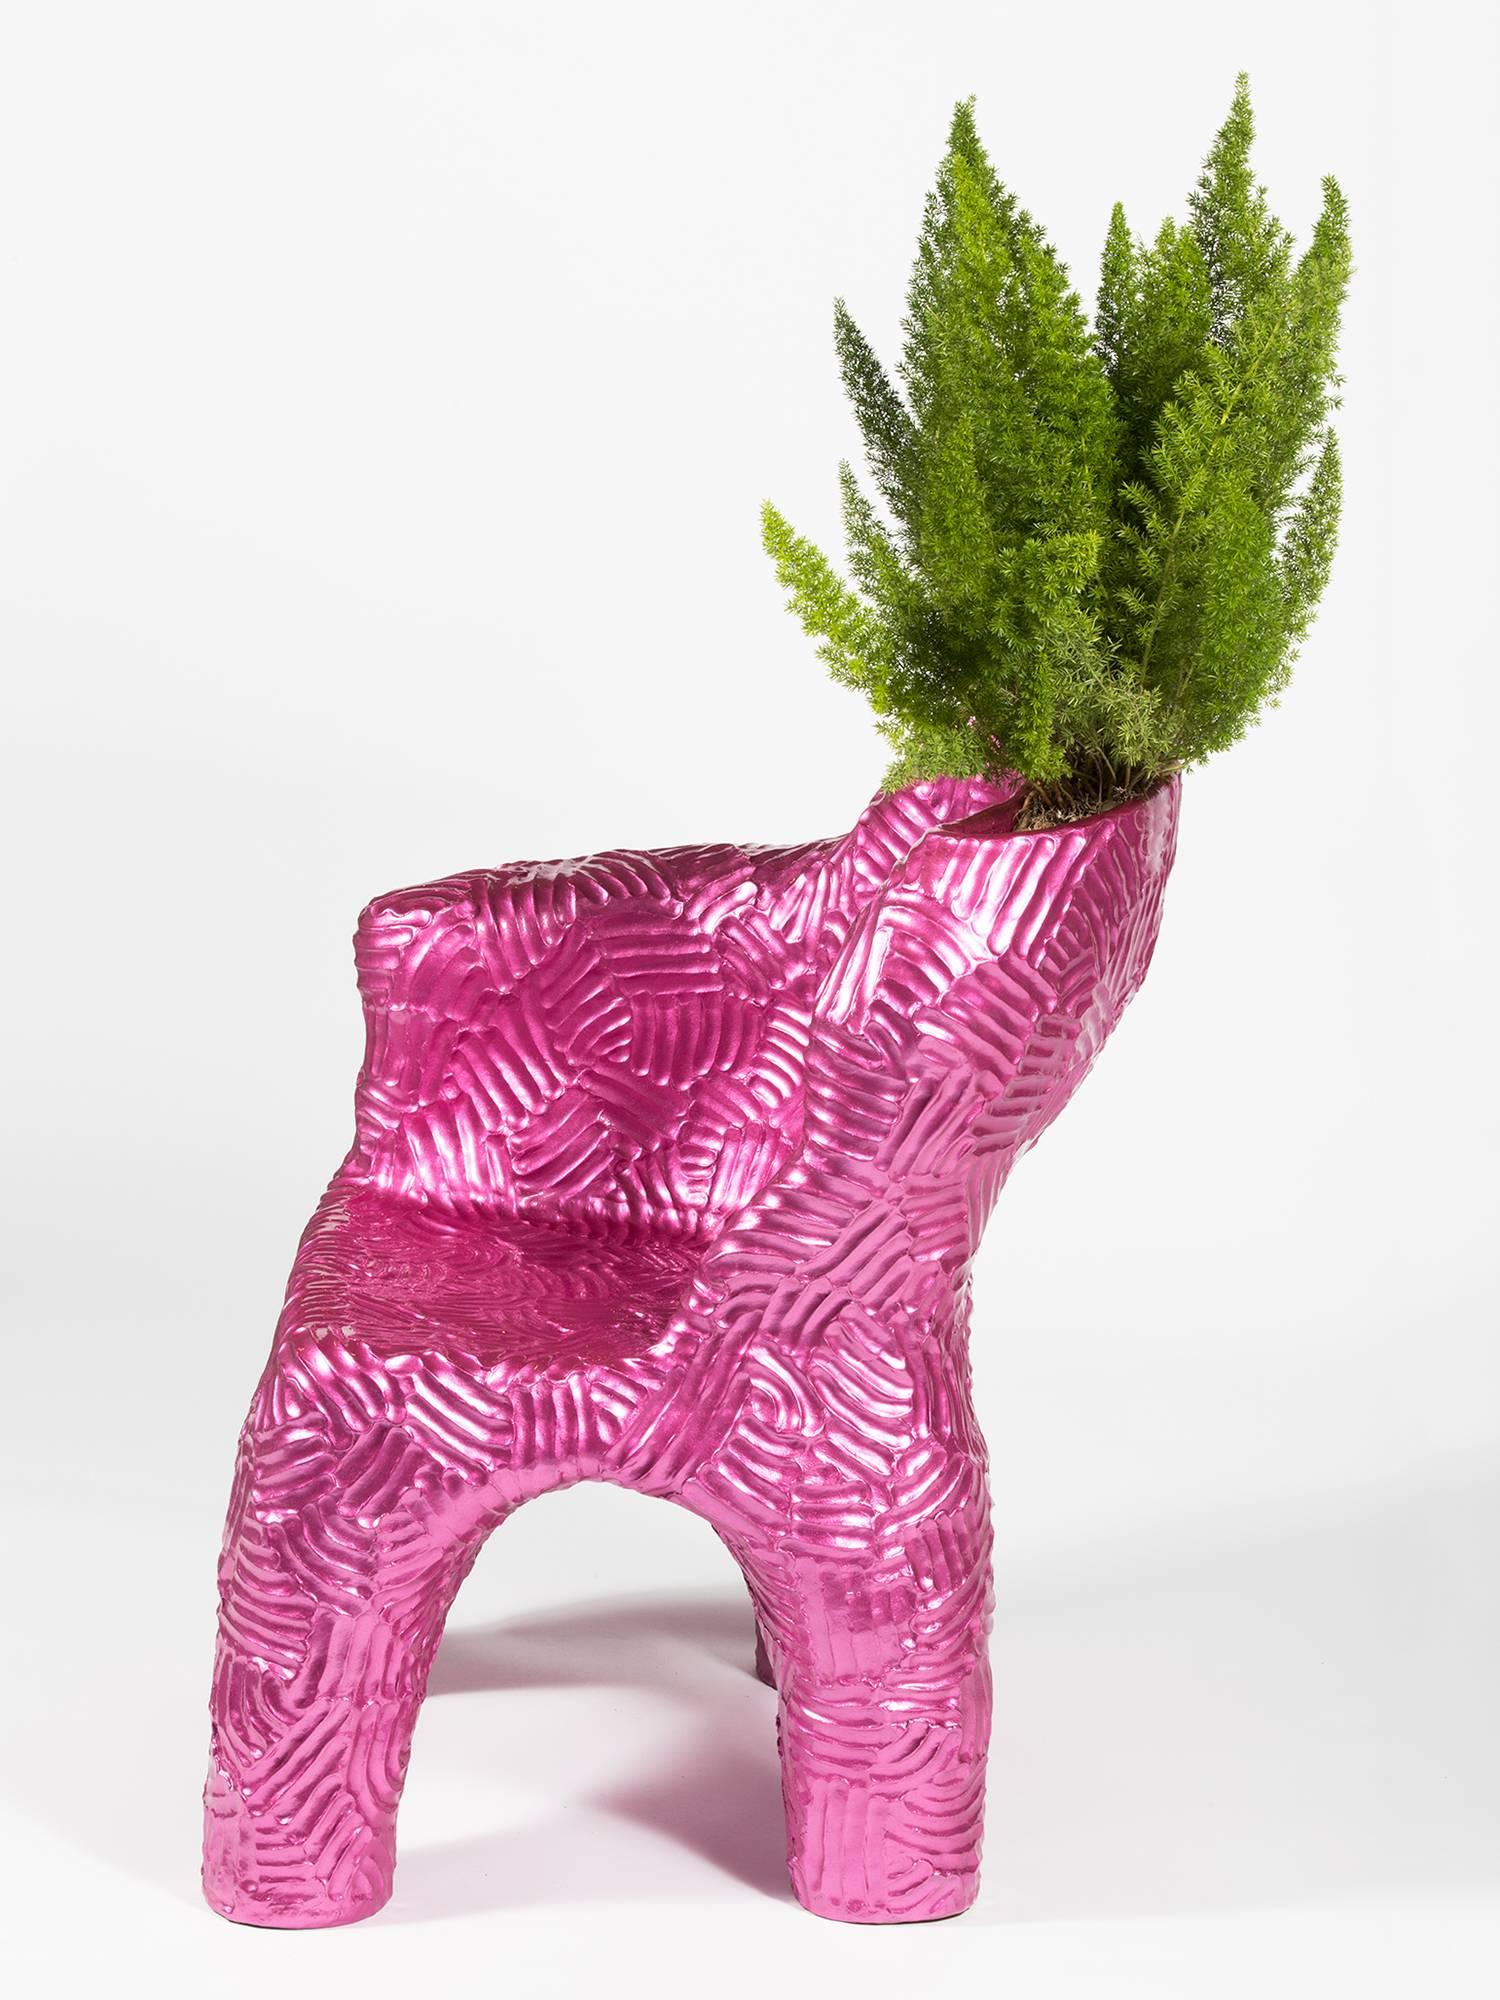 Large painted terracotta indoor/outdoor planter chair, handmade by New York and Medellín-based artist Chris Wolston. Featuring bright automotive paint over hand-formed and fired terracotta forms. Fully functional as both a planter and a chair. Made